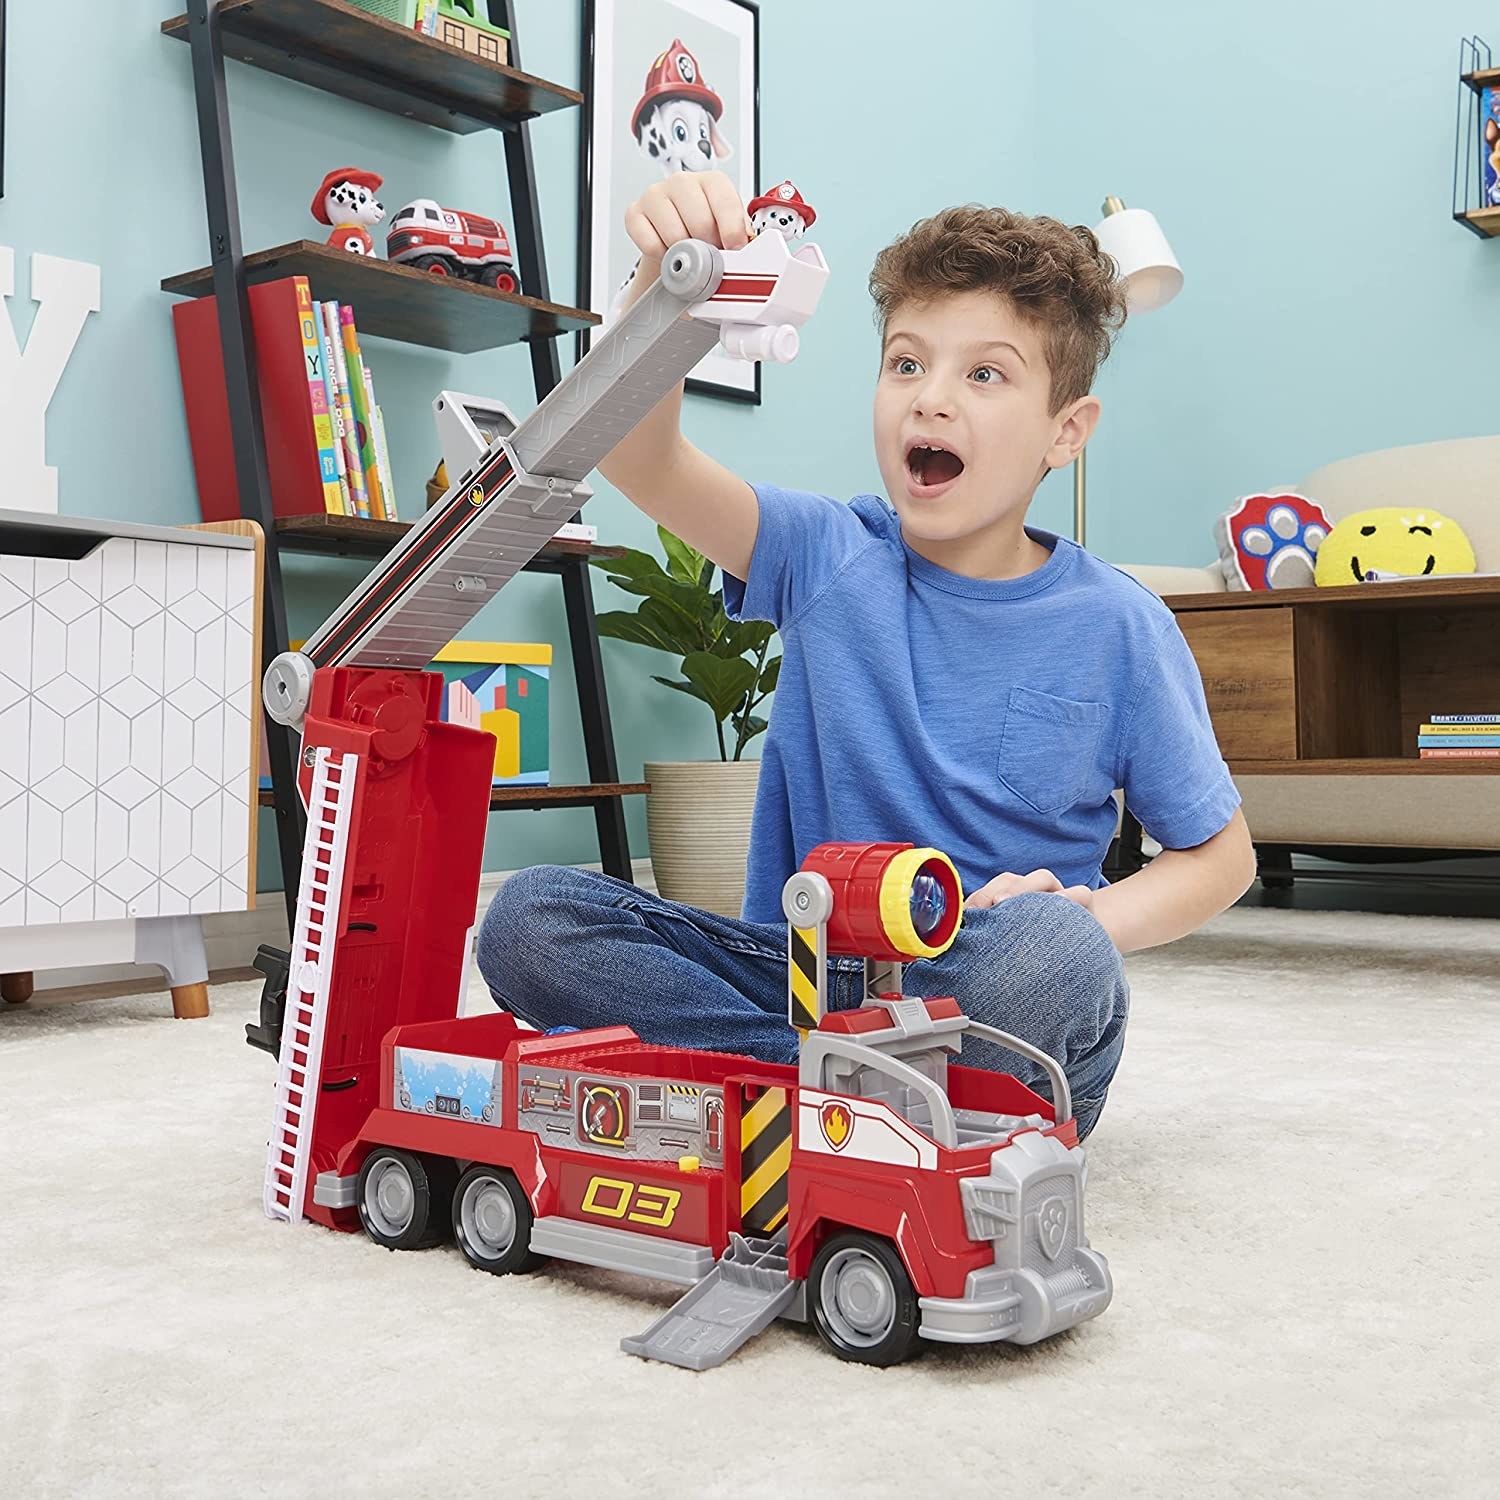 Child playing with Paw Patrol Movie fire truck